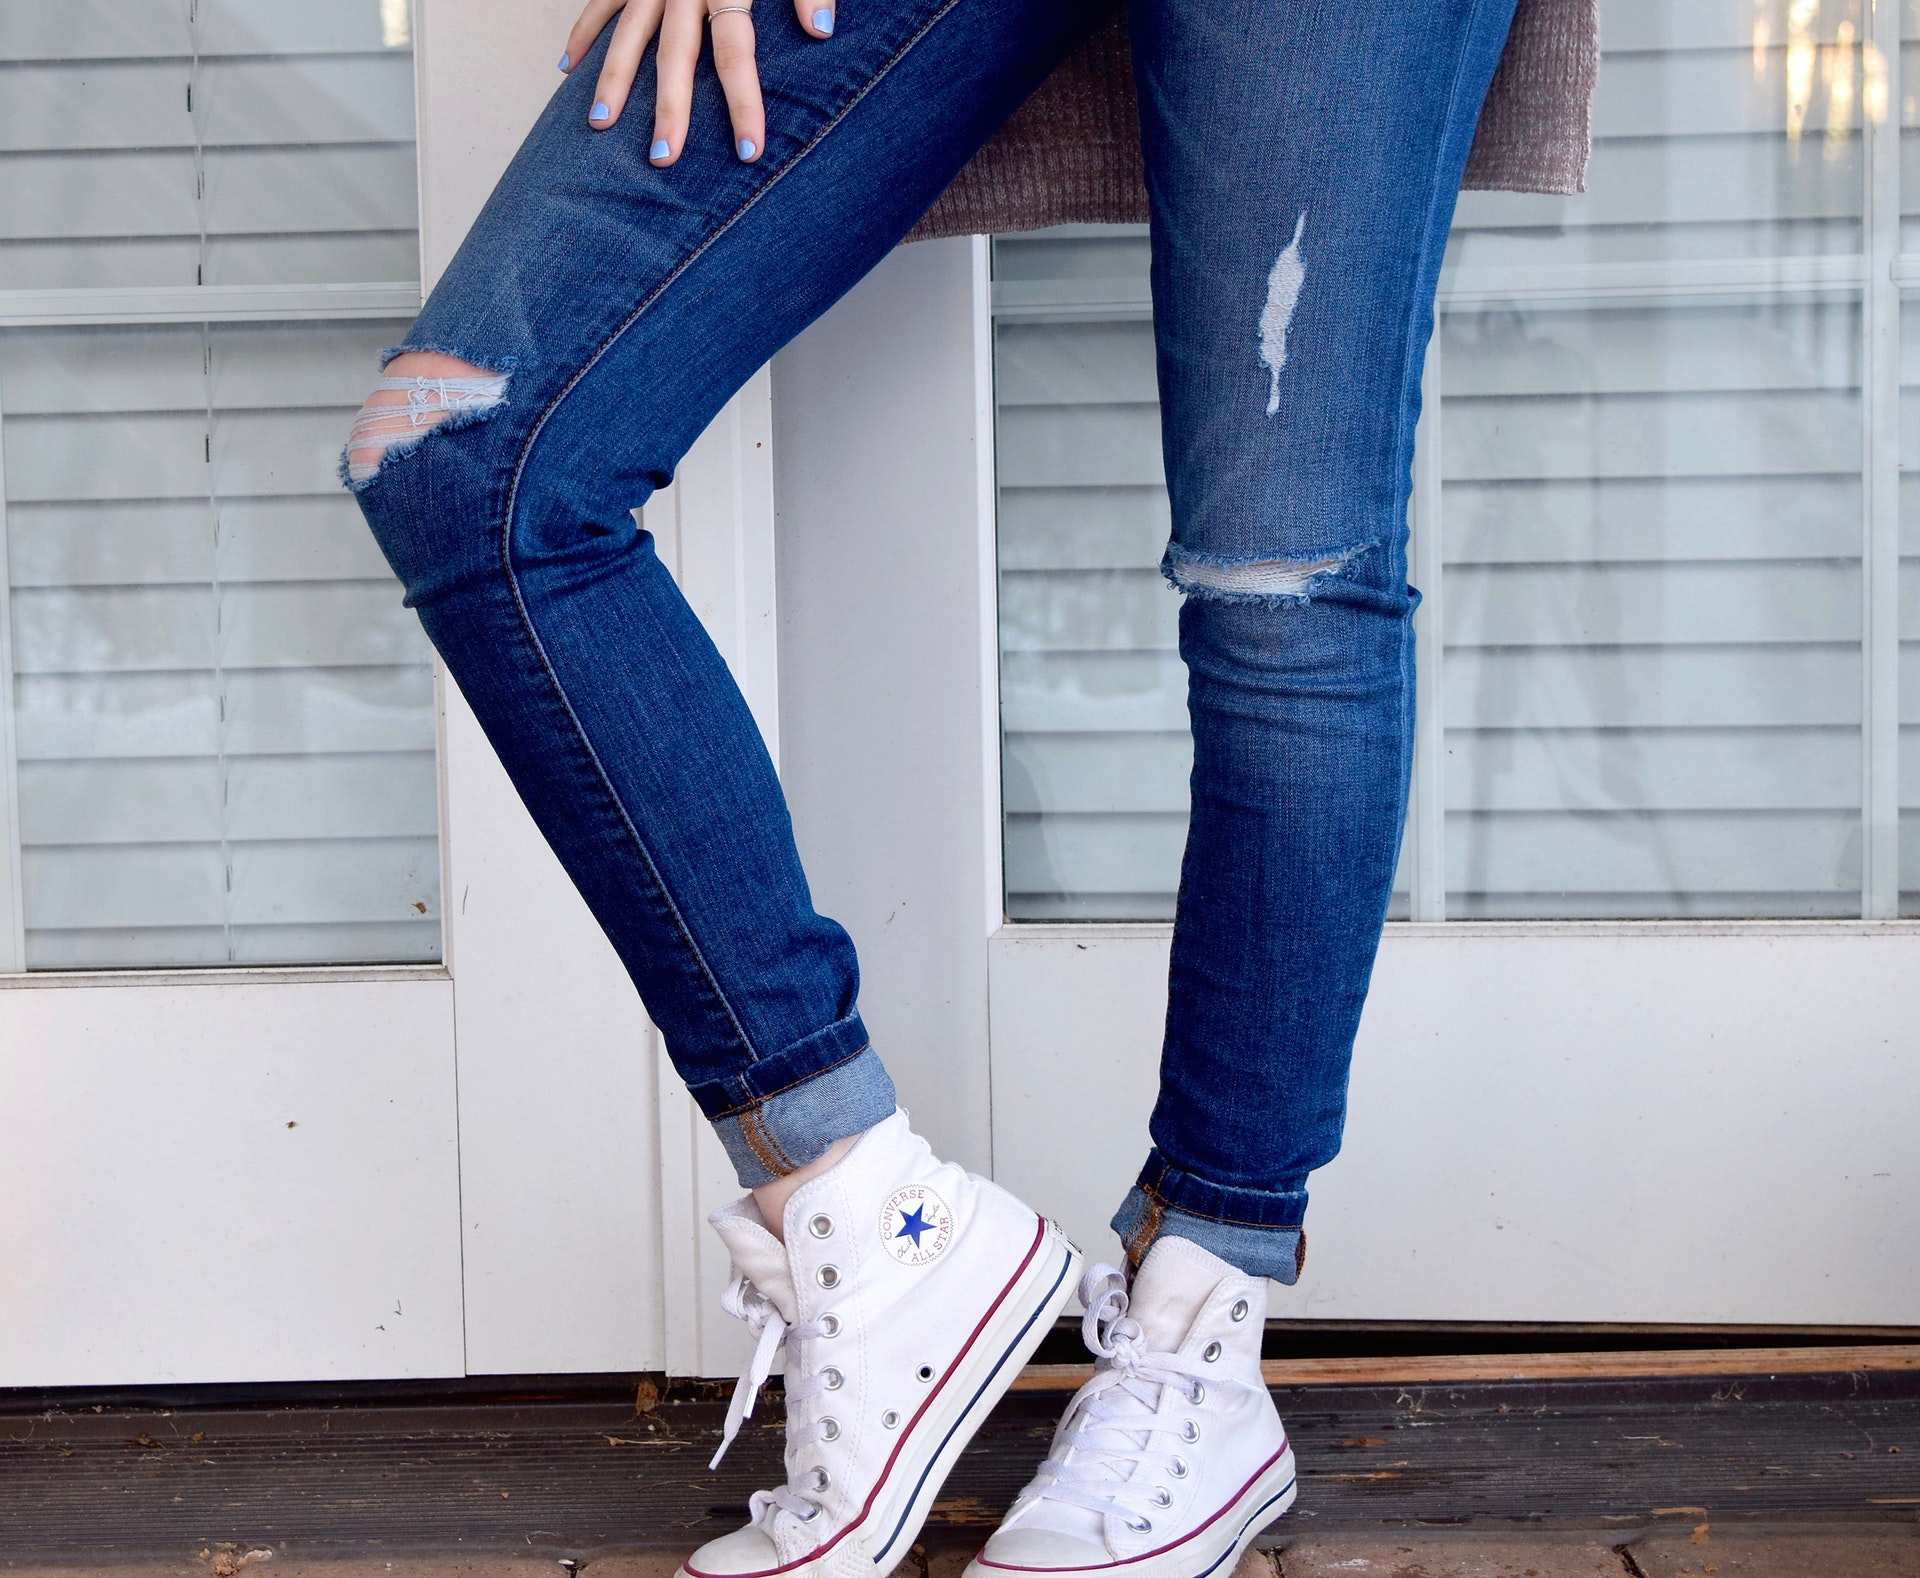 Jean And Converse